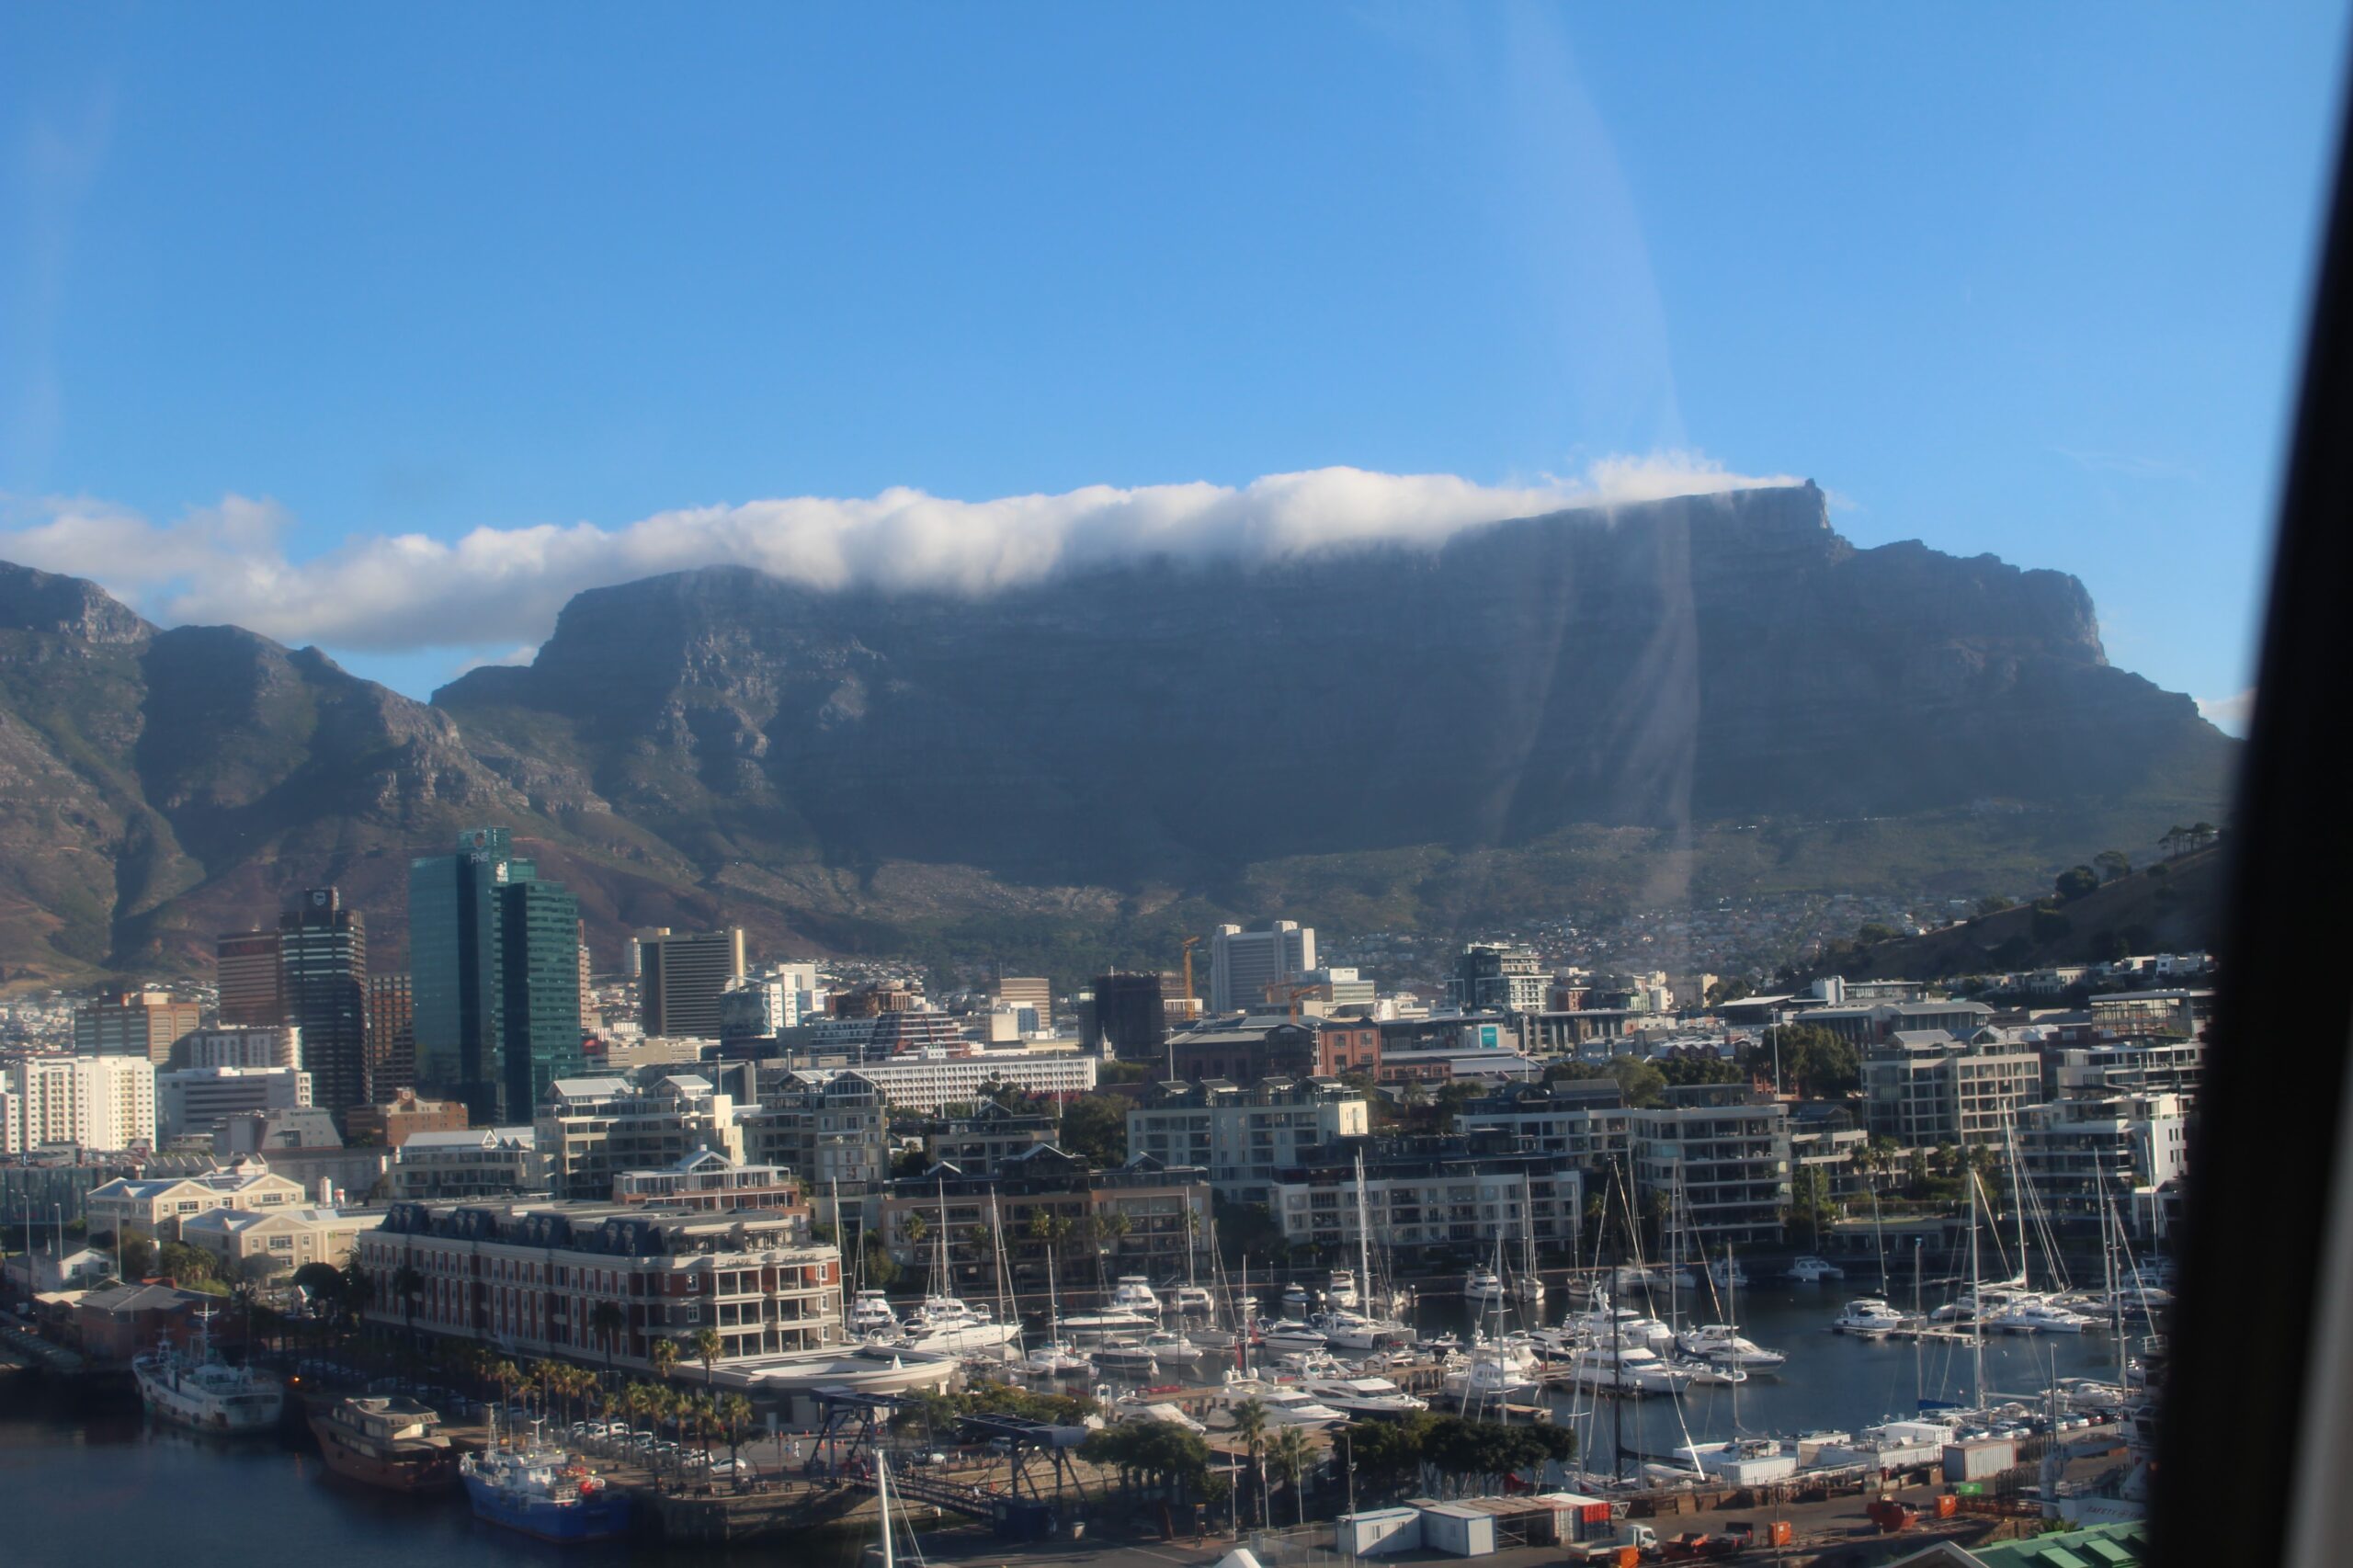 Day 1 – Cape Town